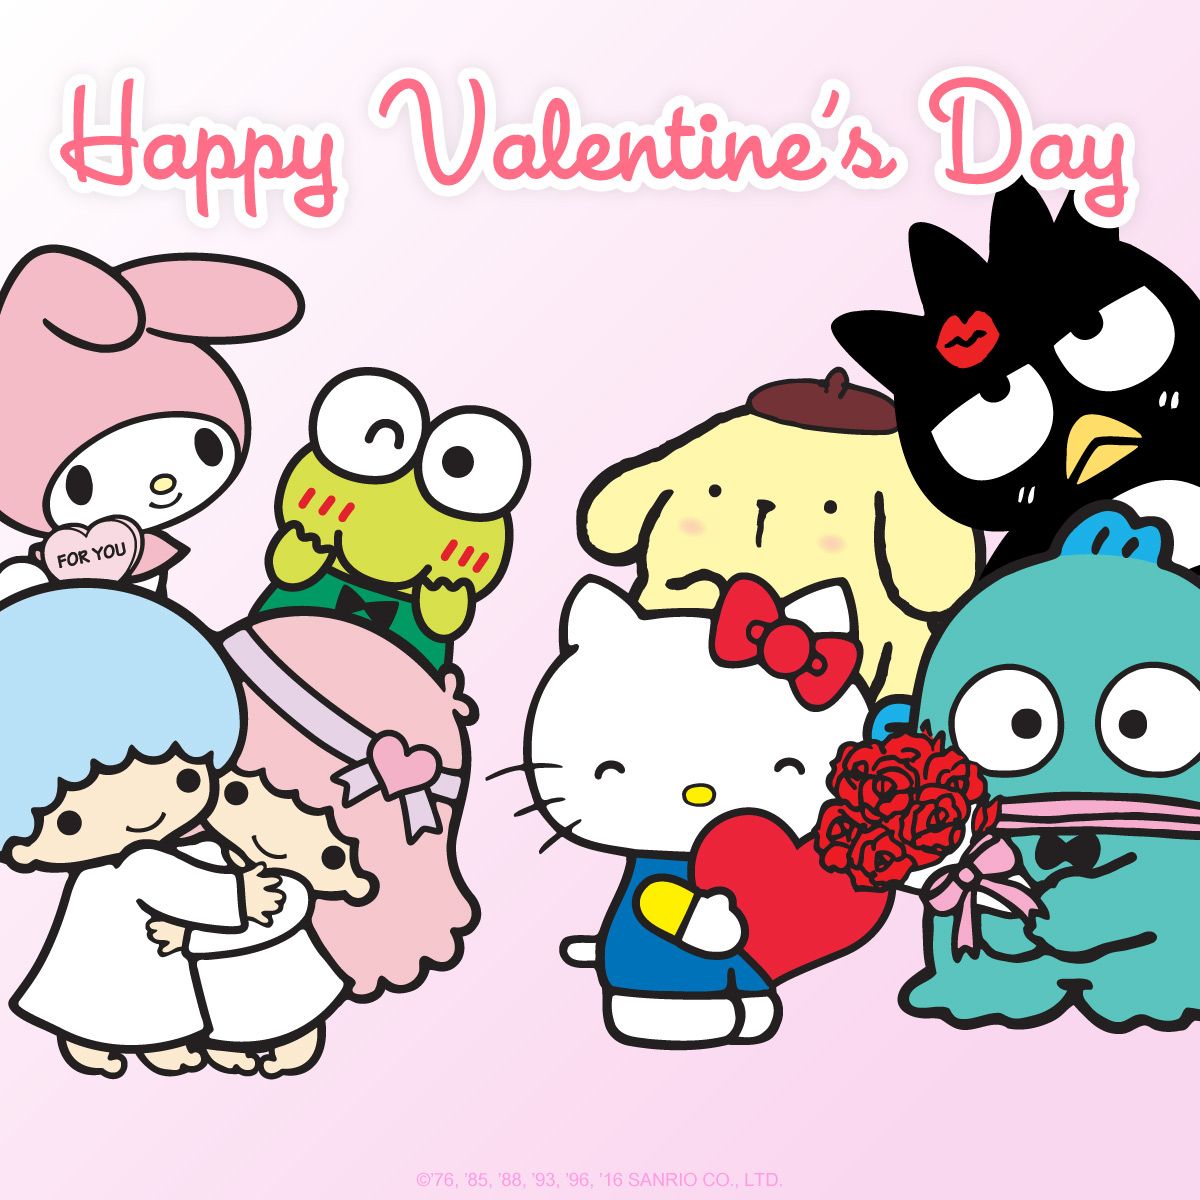 Wishing you a Valentine's Day filled with friendship and love!. Hello kitty, Sanrio hello kitty, Hello kitty christmas